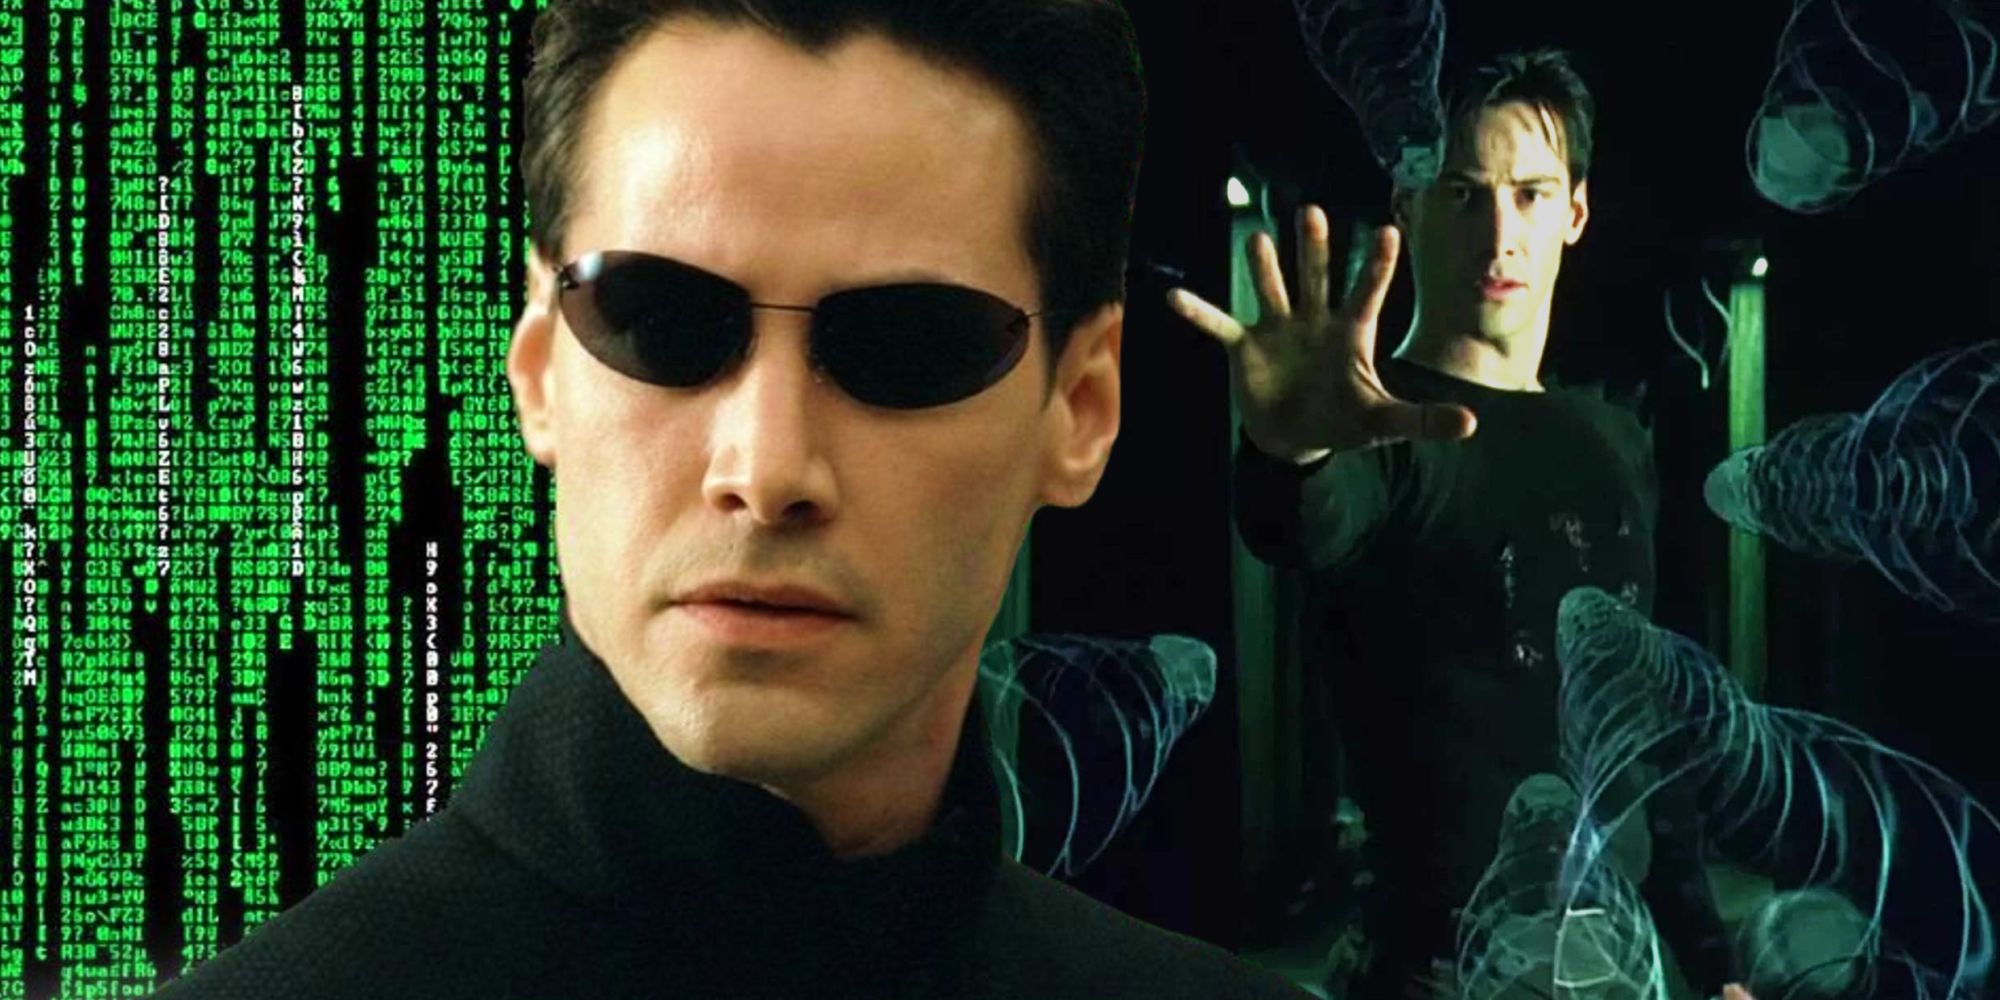 Side by side stills of Keanu Keeves in The Matrix, a simulated reality sci-fi movie